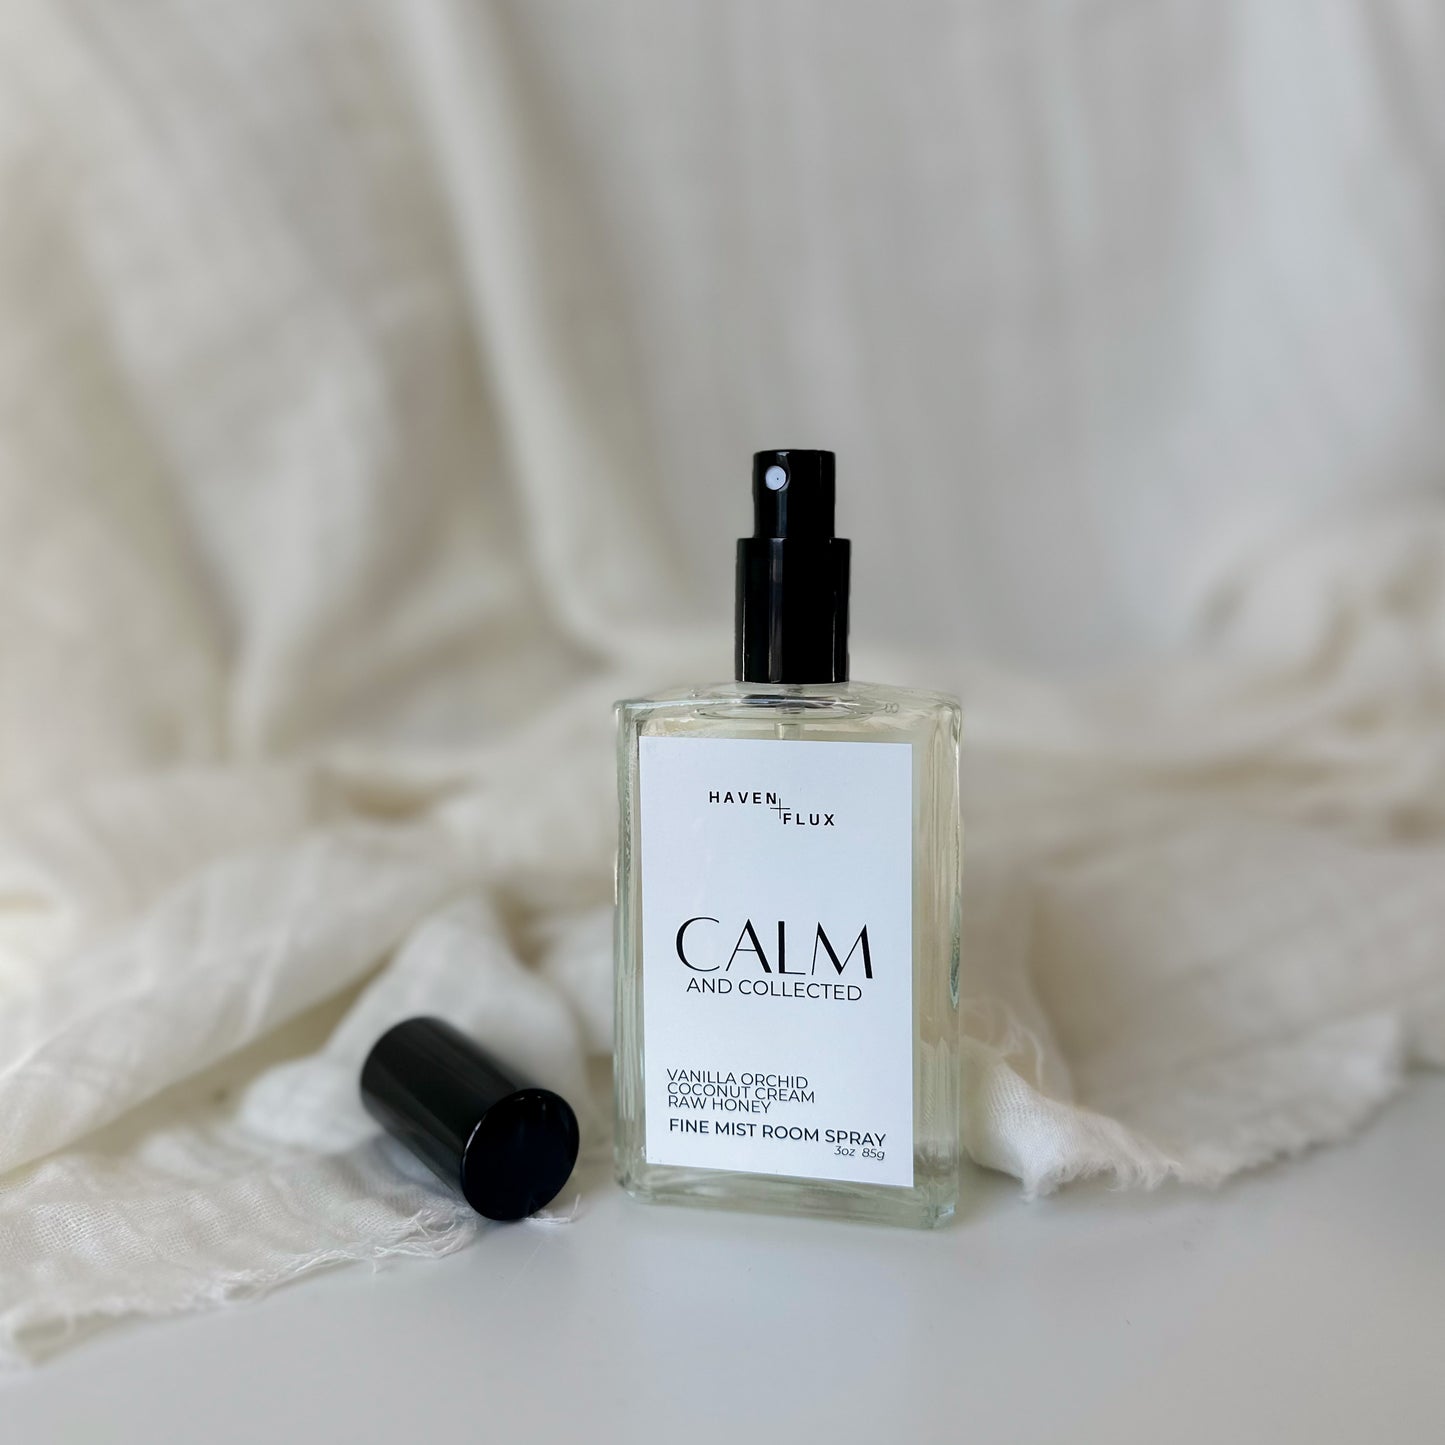 CALM AND COLLECTED ROOM SPRAY